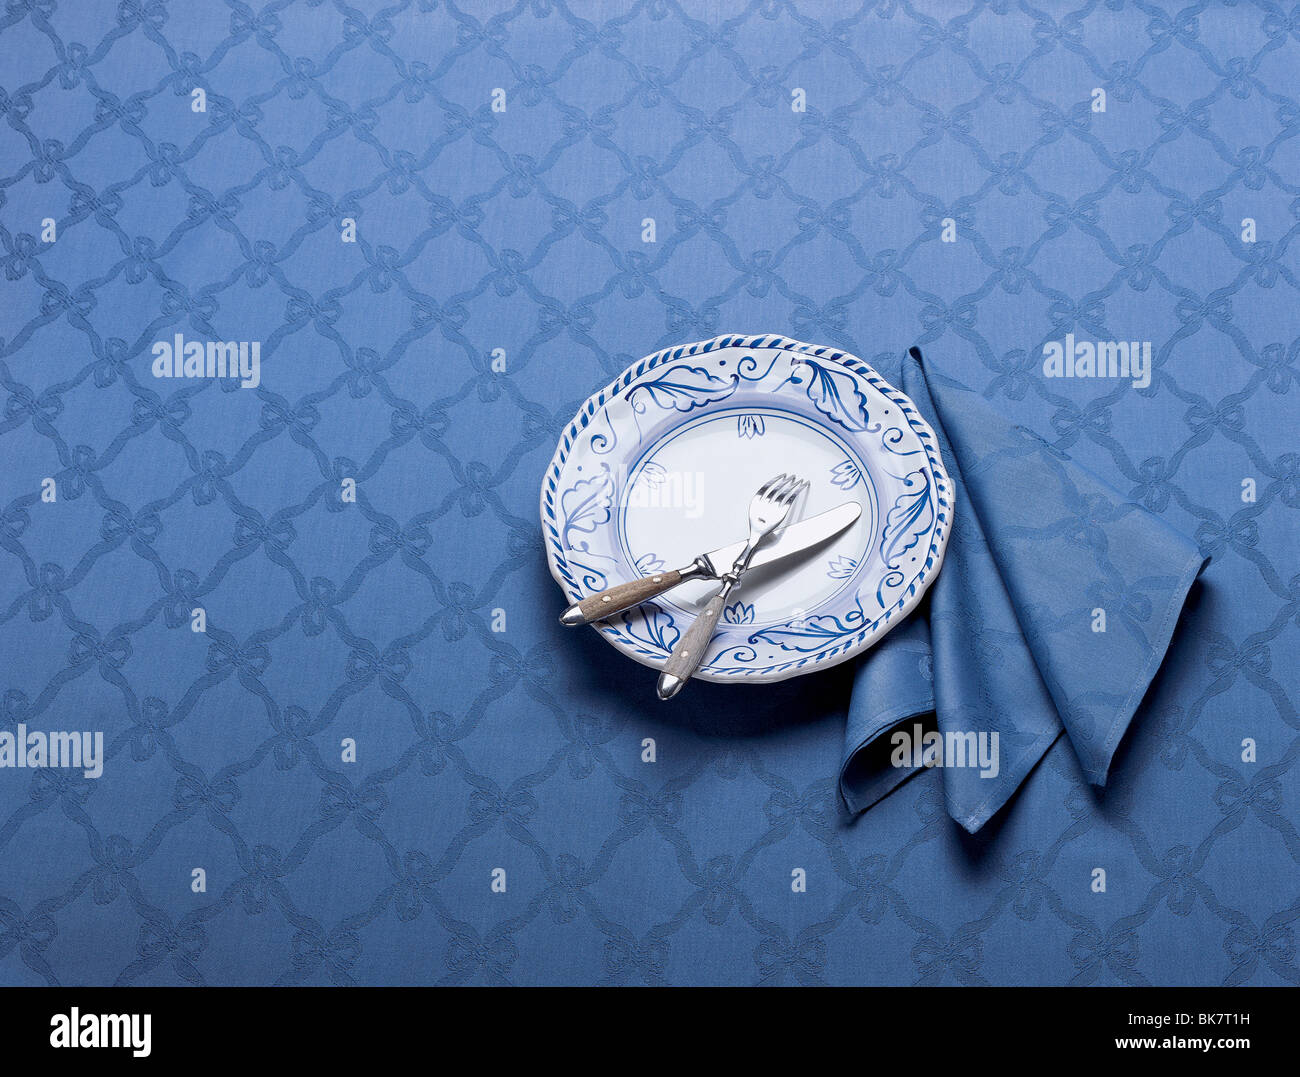 Blue plate on blue brocaide table cloth with knife and fork. Stock Photo